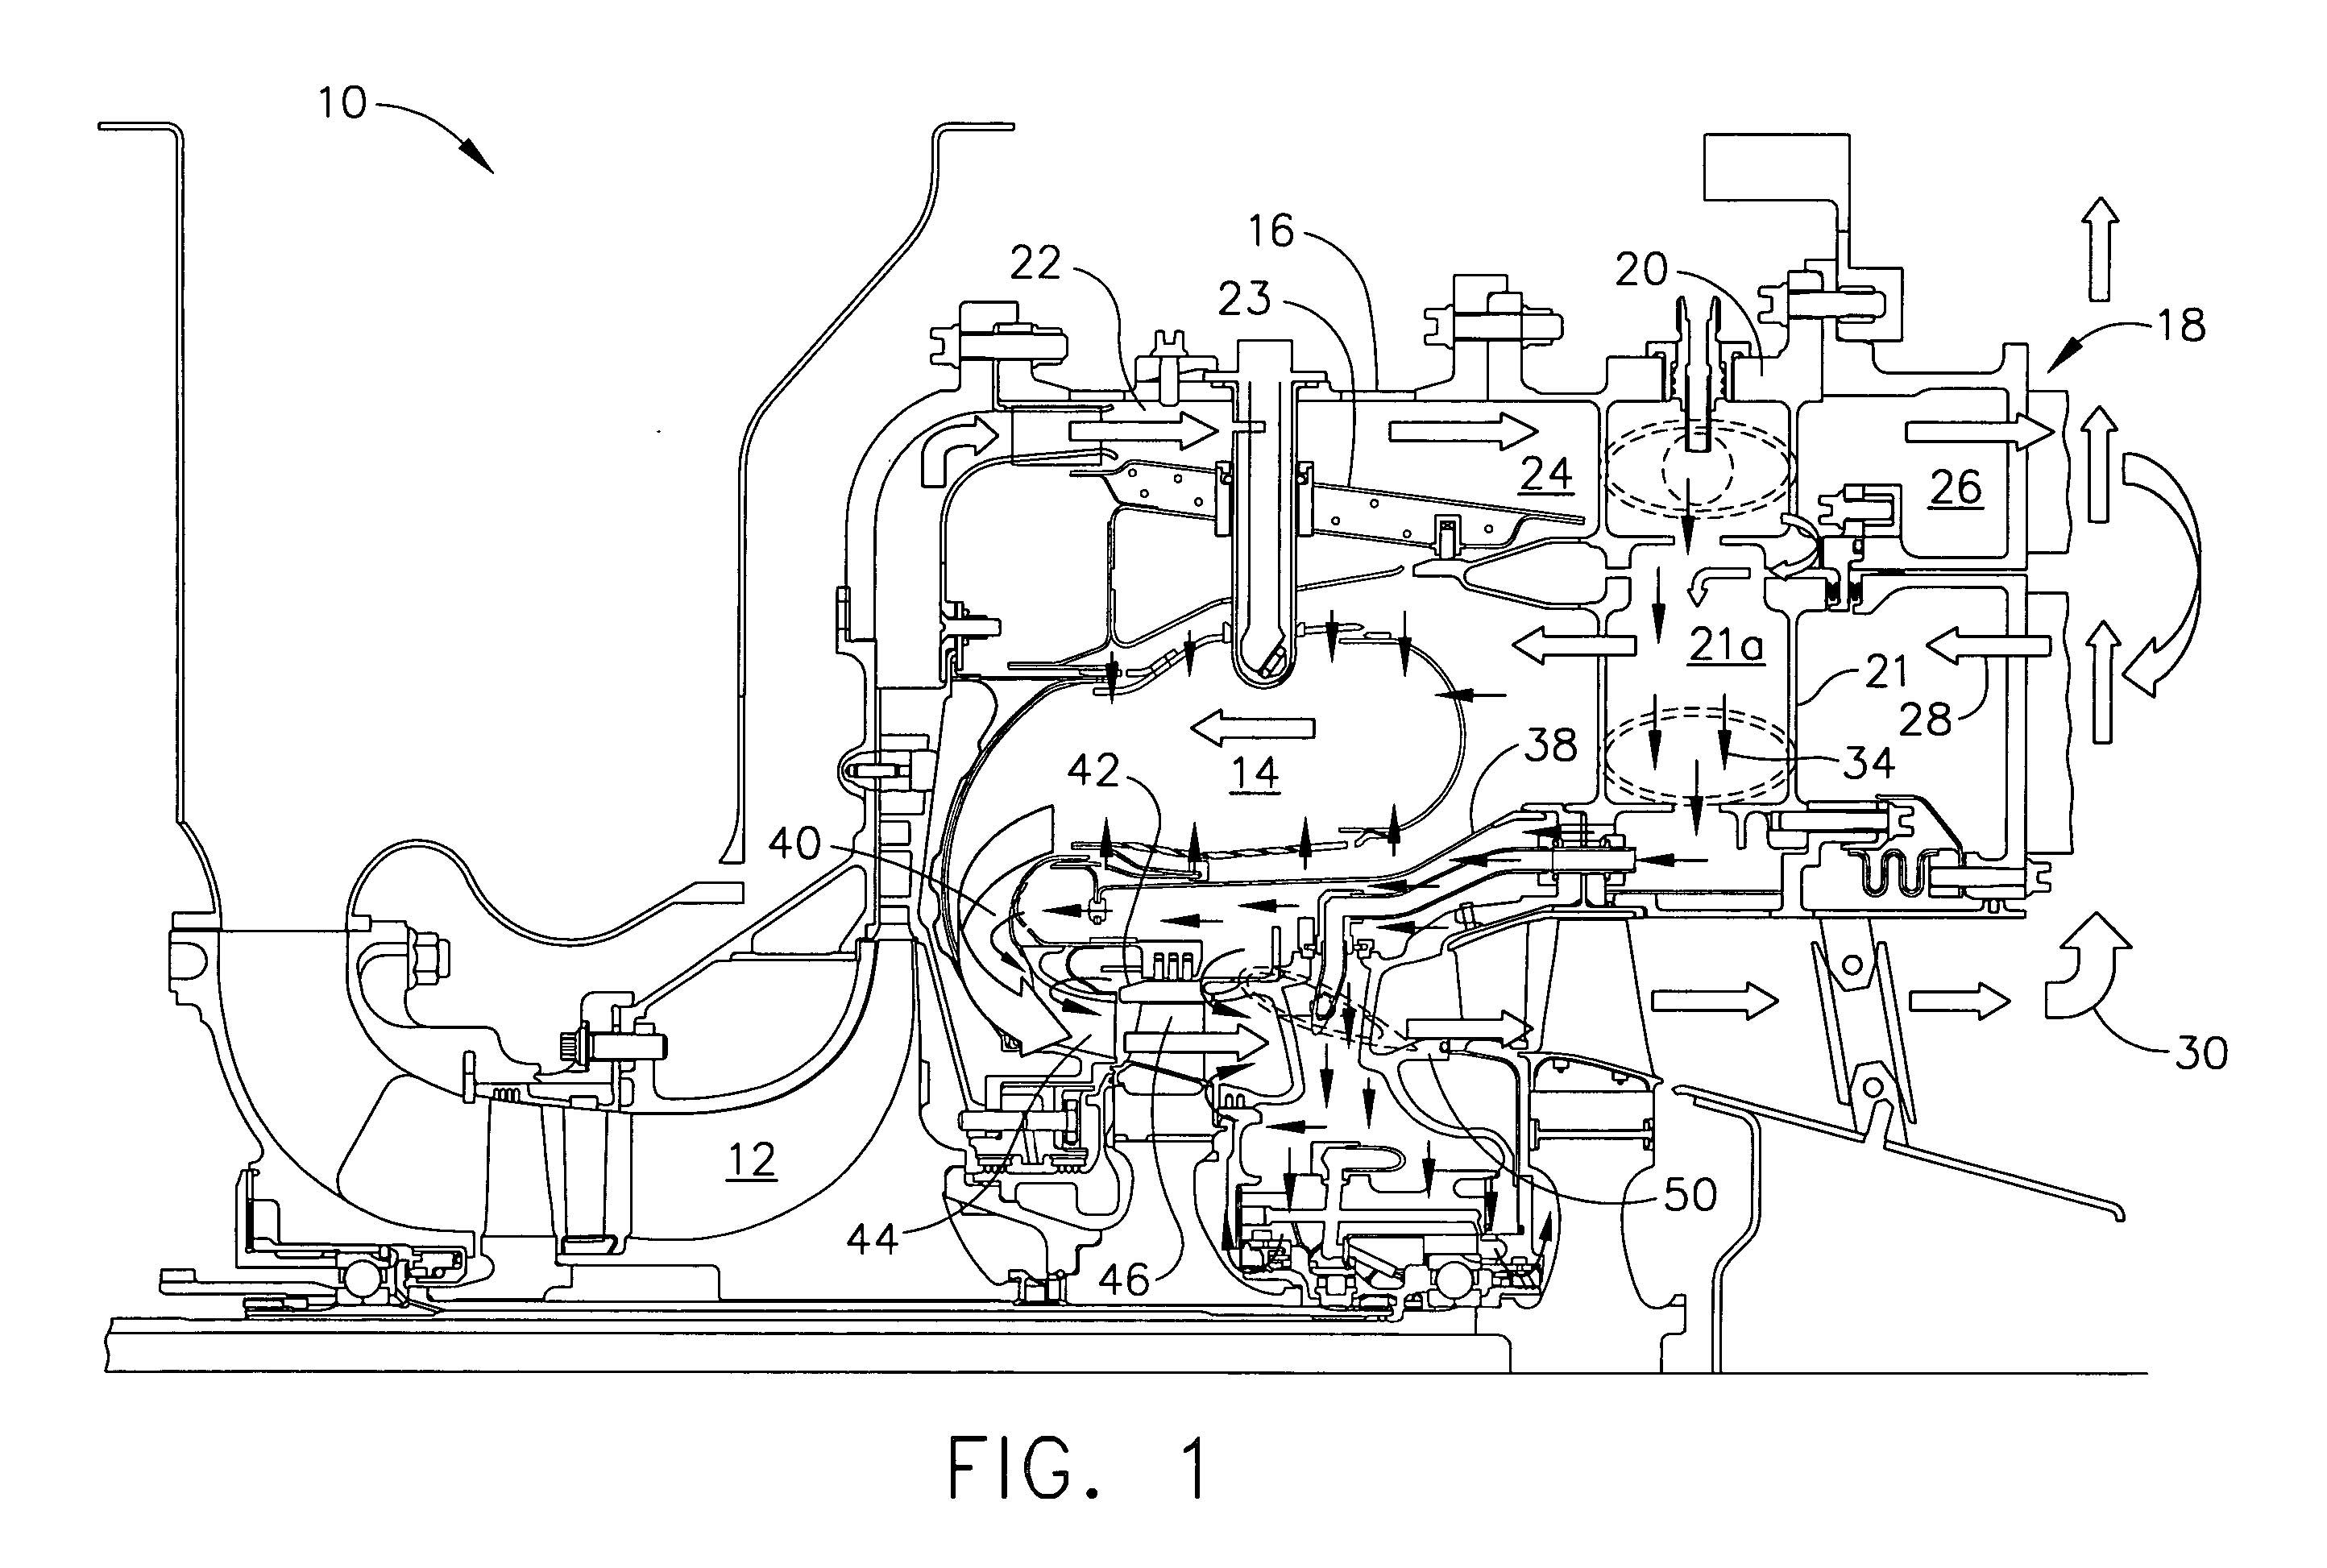 Secondary flow, high pressure turbine module cooling air system for recuperated gas turbine engines